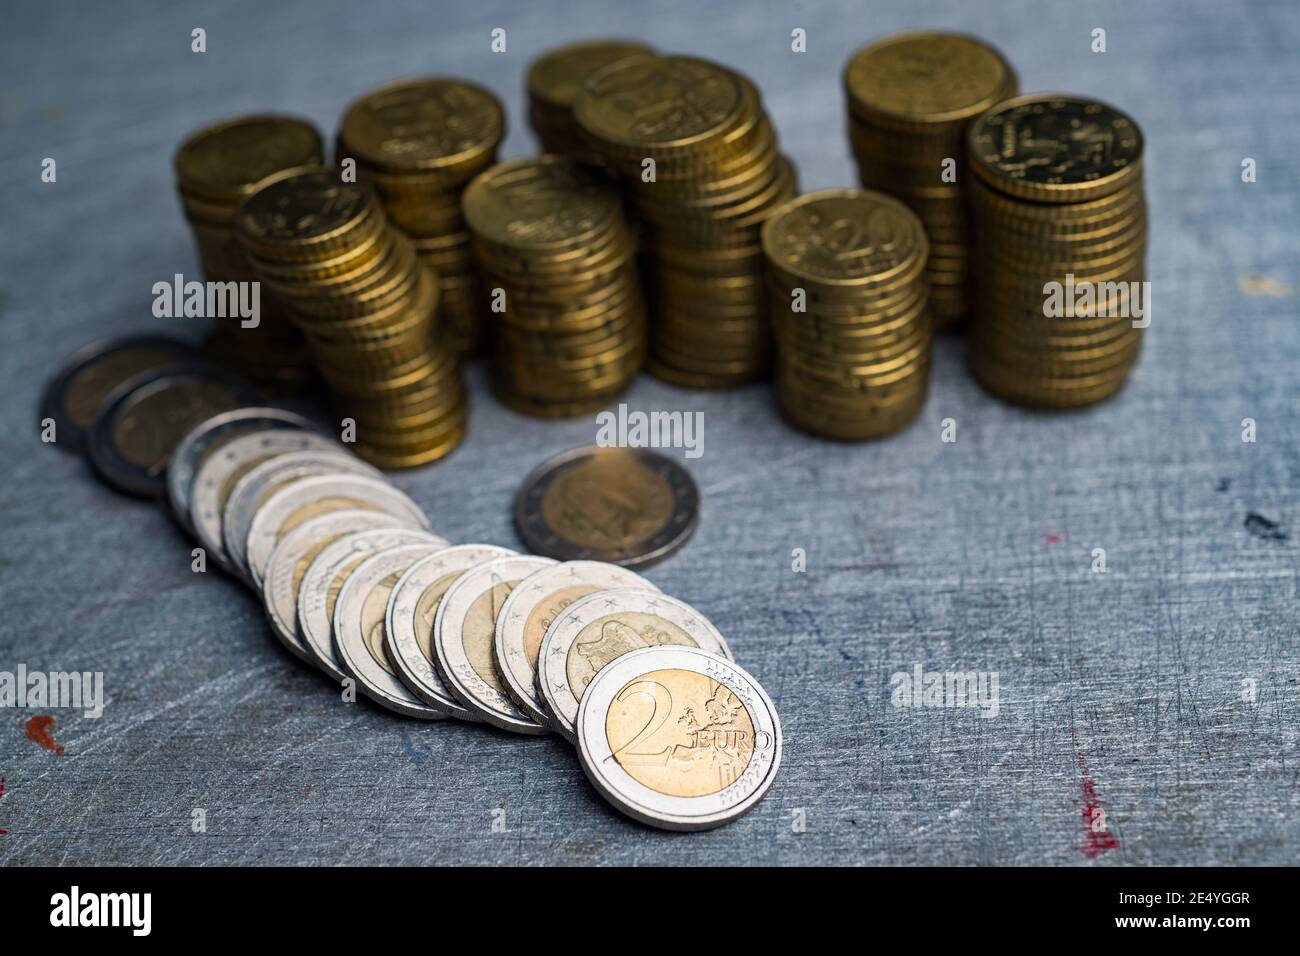 Pile of old and used euro coins Stock Photo